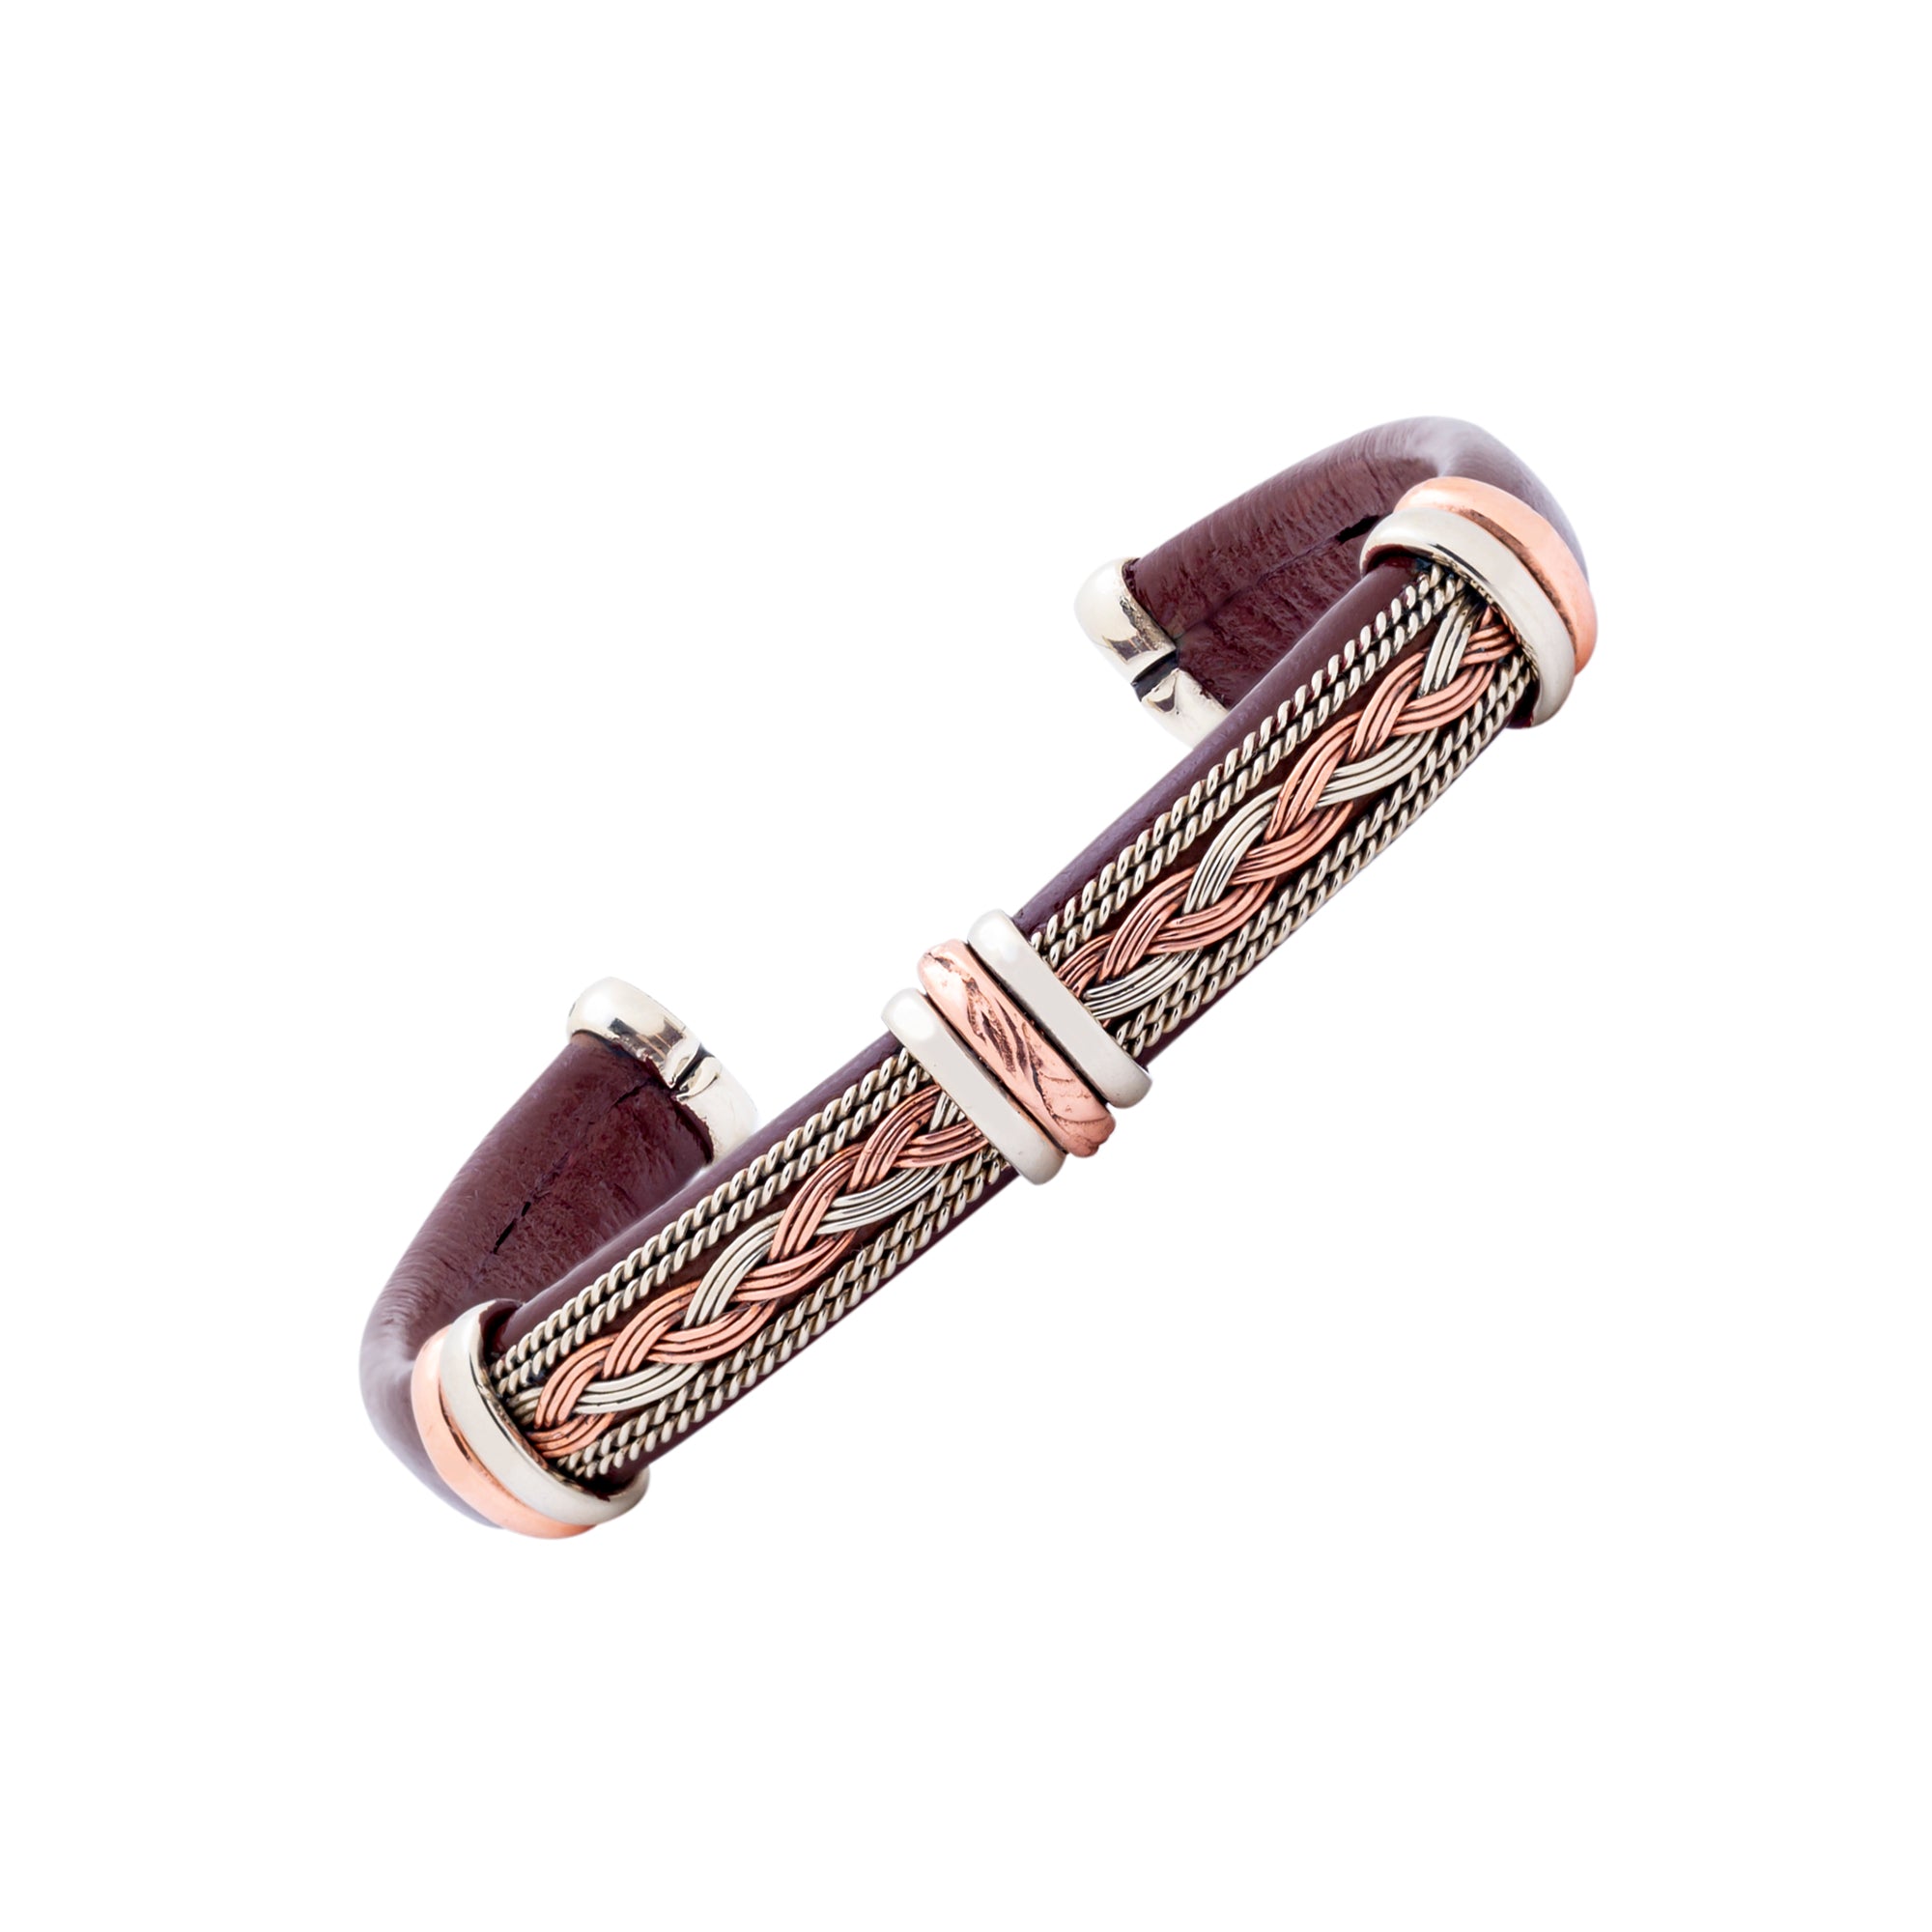 Leather Bracelet BR.ULB.0305 - Brown Leather Cuff Bracelet -Handcrafted by HPSilver, LLC.